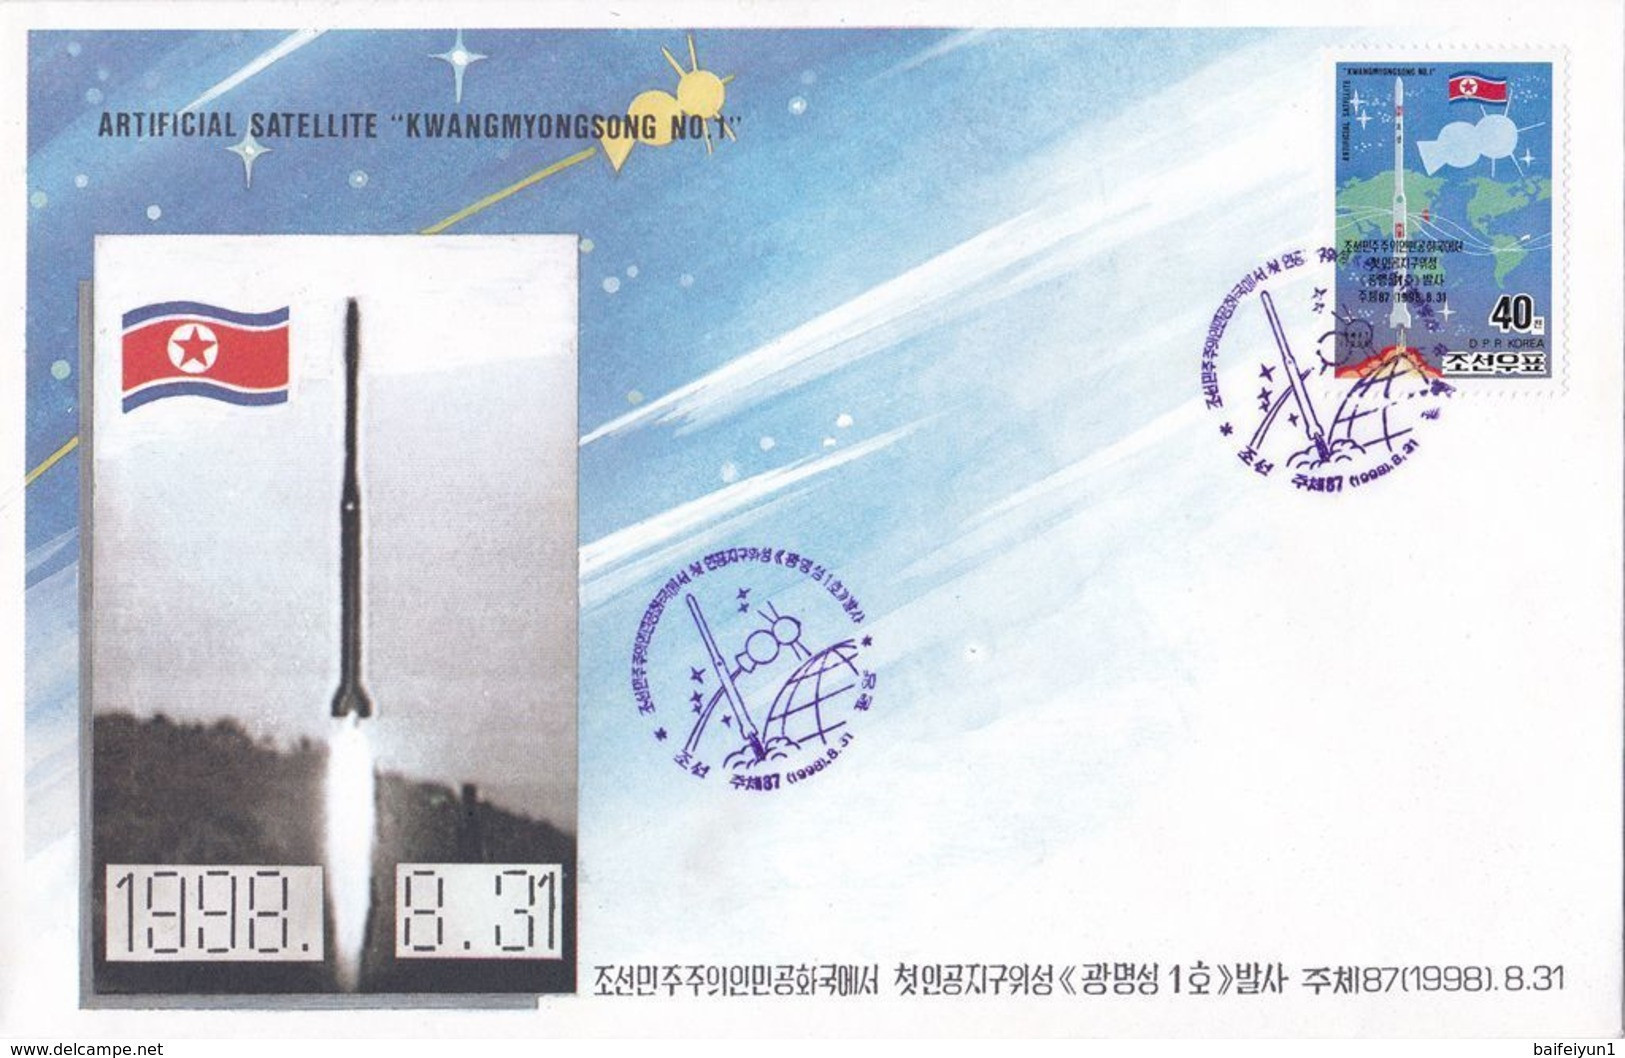 1998 North Korea   First Satellite Kwangmyongsong -1 Rocket Stamp  First Day Cover FDC - Asien